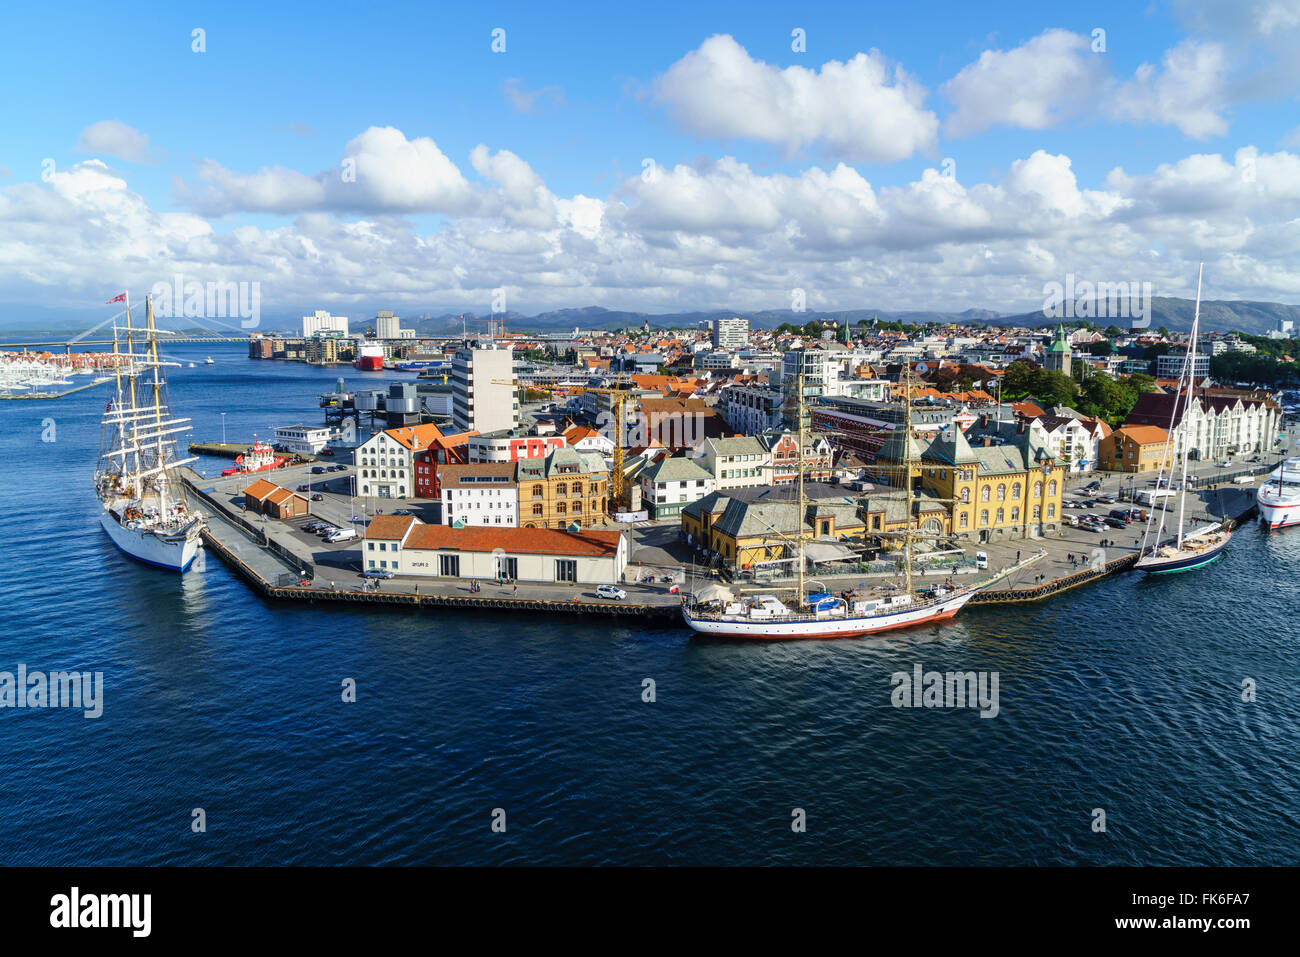 Stavanger harbour, Stavanger, Norway's third largest city and centre of the country's oil industry, Norway, Scandinavia, Europe Stock Photo